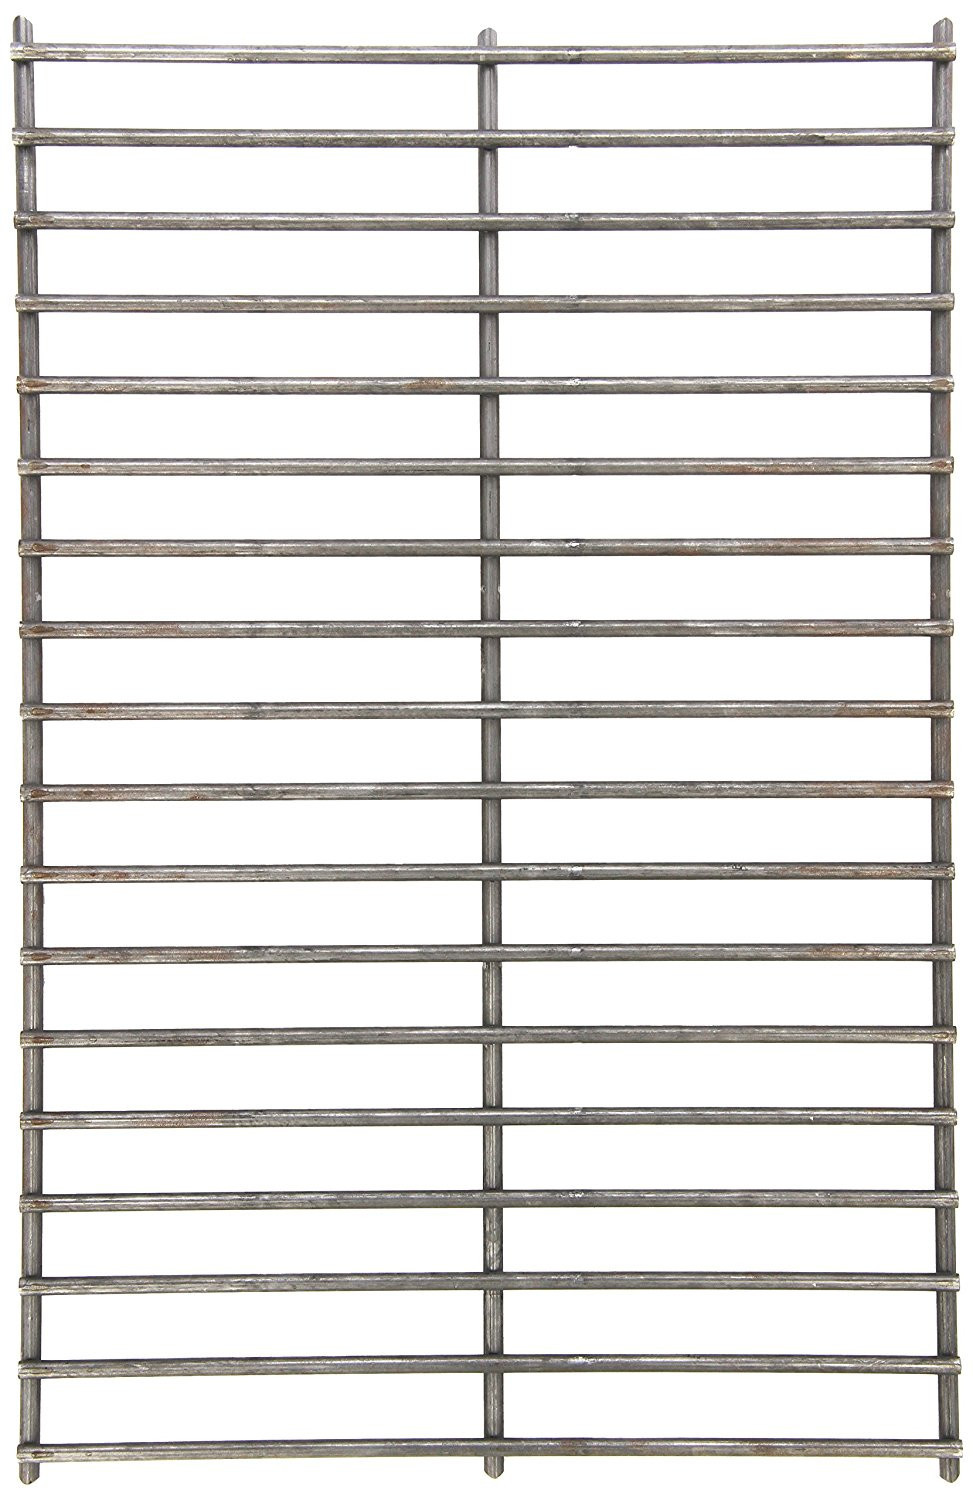 Steel wire rock grate for Charbroil, Kenmore, Patio Kitchen, ProChef, Thermos brand gas grills